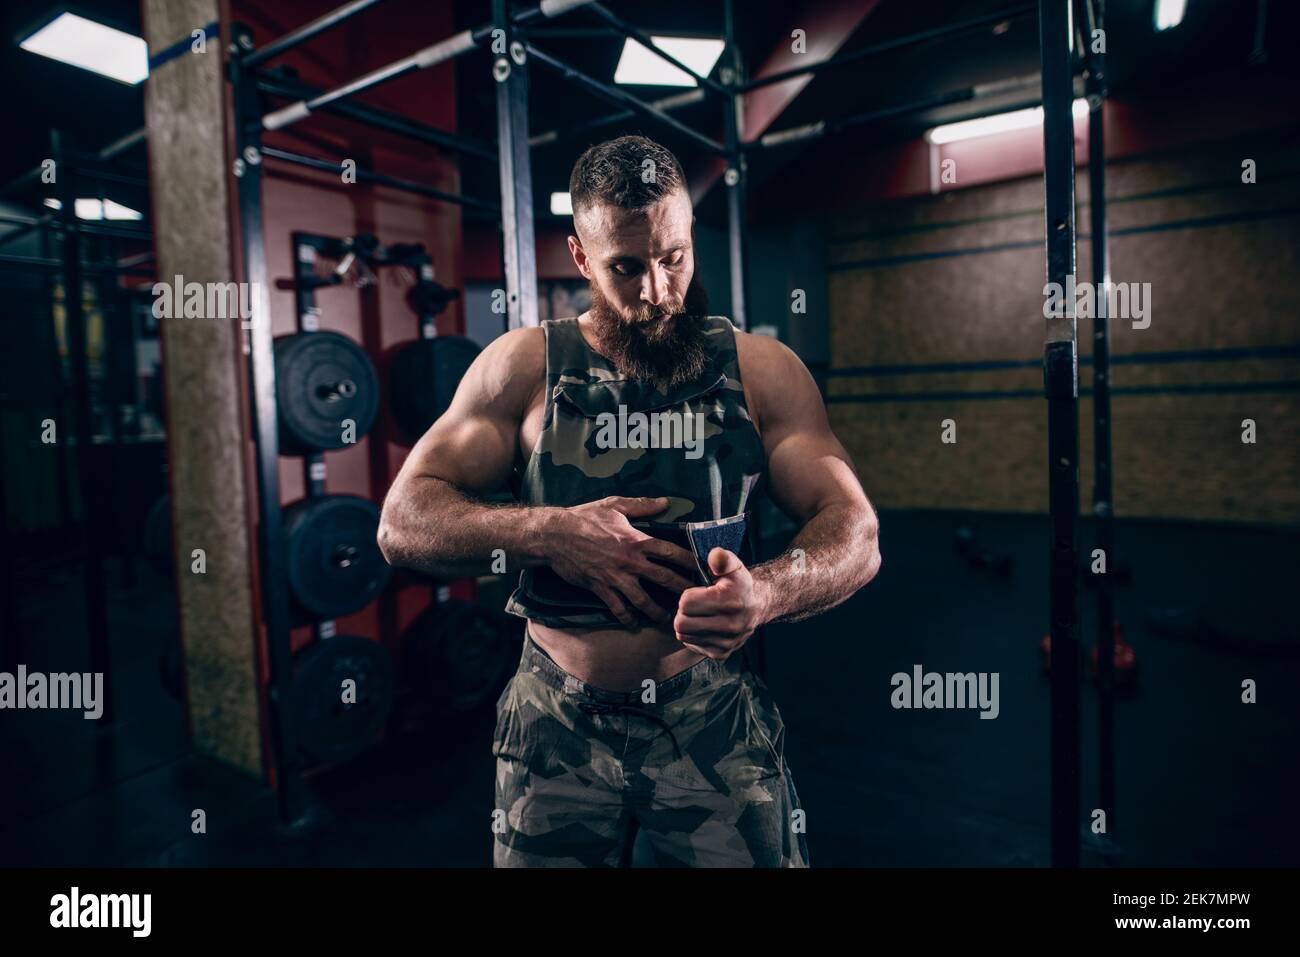 Muscular caucasian bearded man tightening up military style weighted vest  in crossfit gym. Weight plates and kettlebells in background Stock Photo -  Alamy